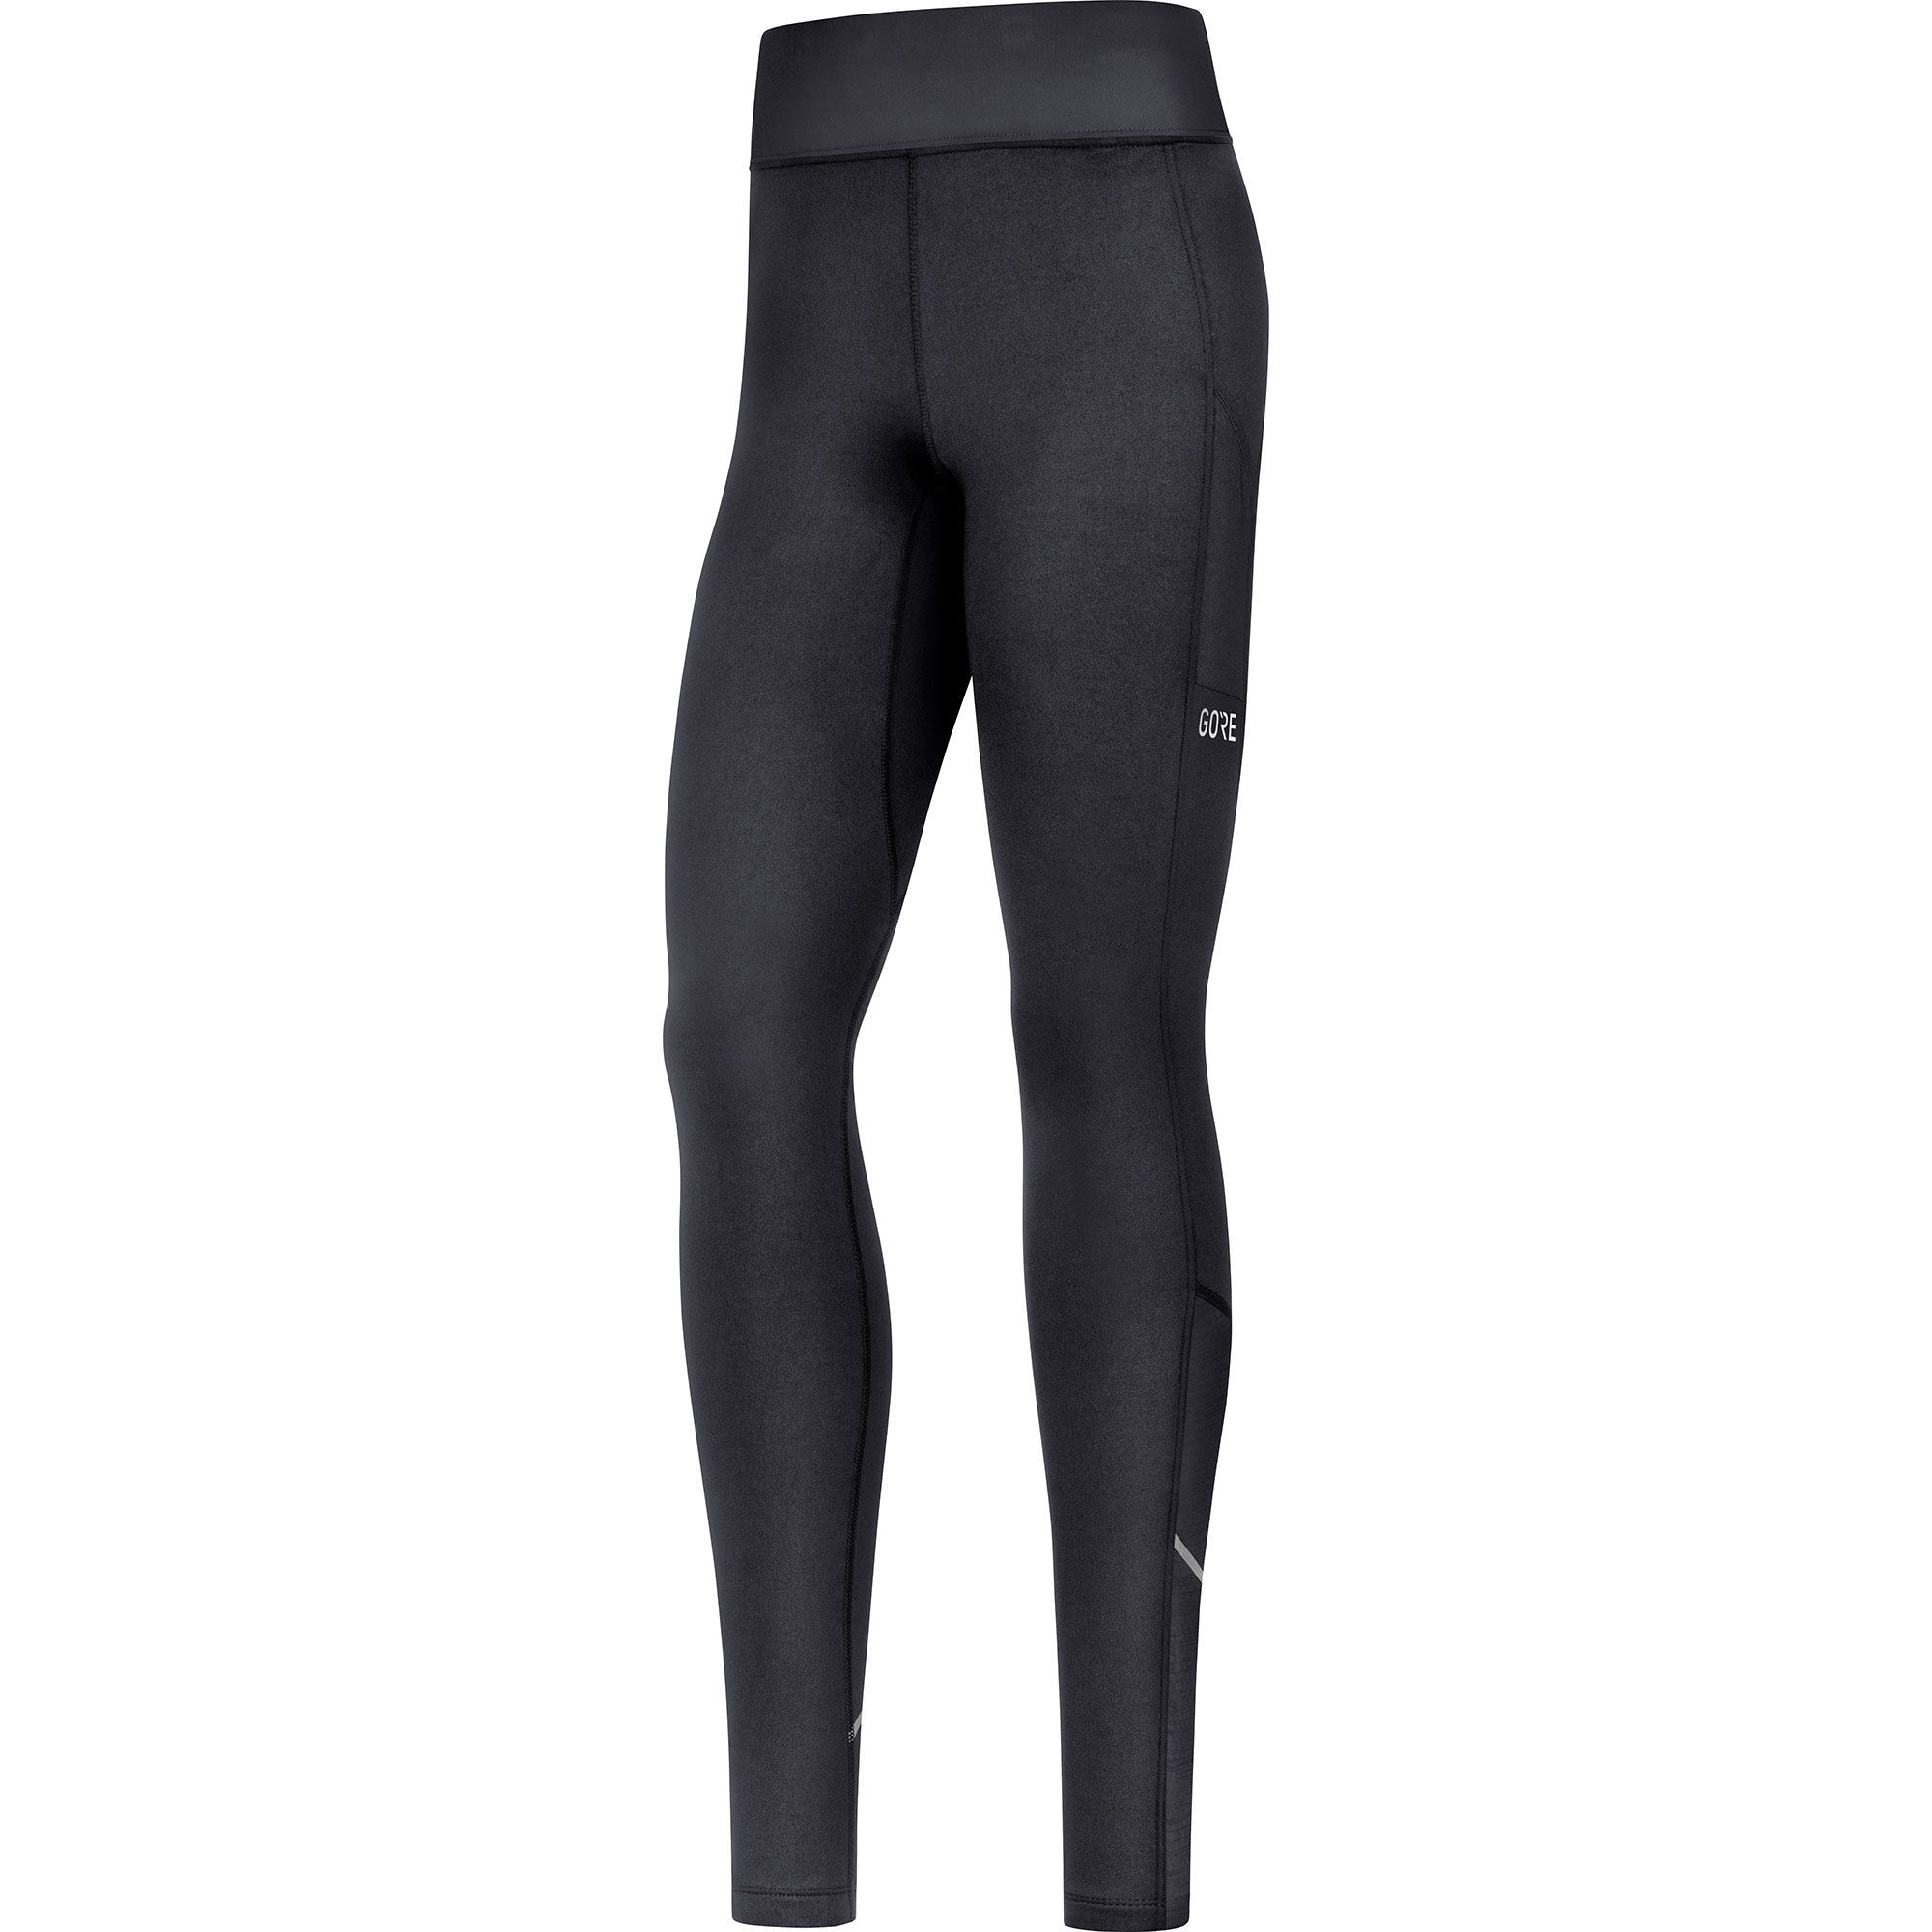 Gore Wear R3 Thermo Tights - Running leggings - Women's